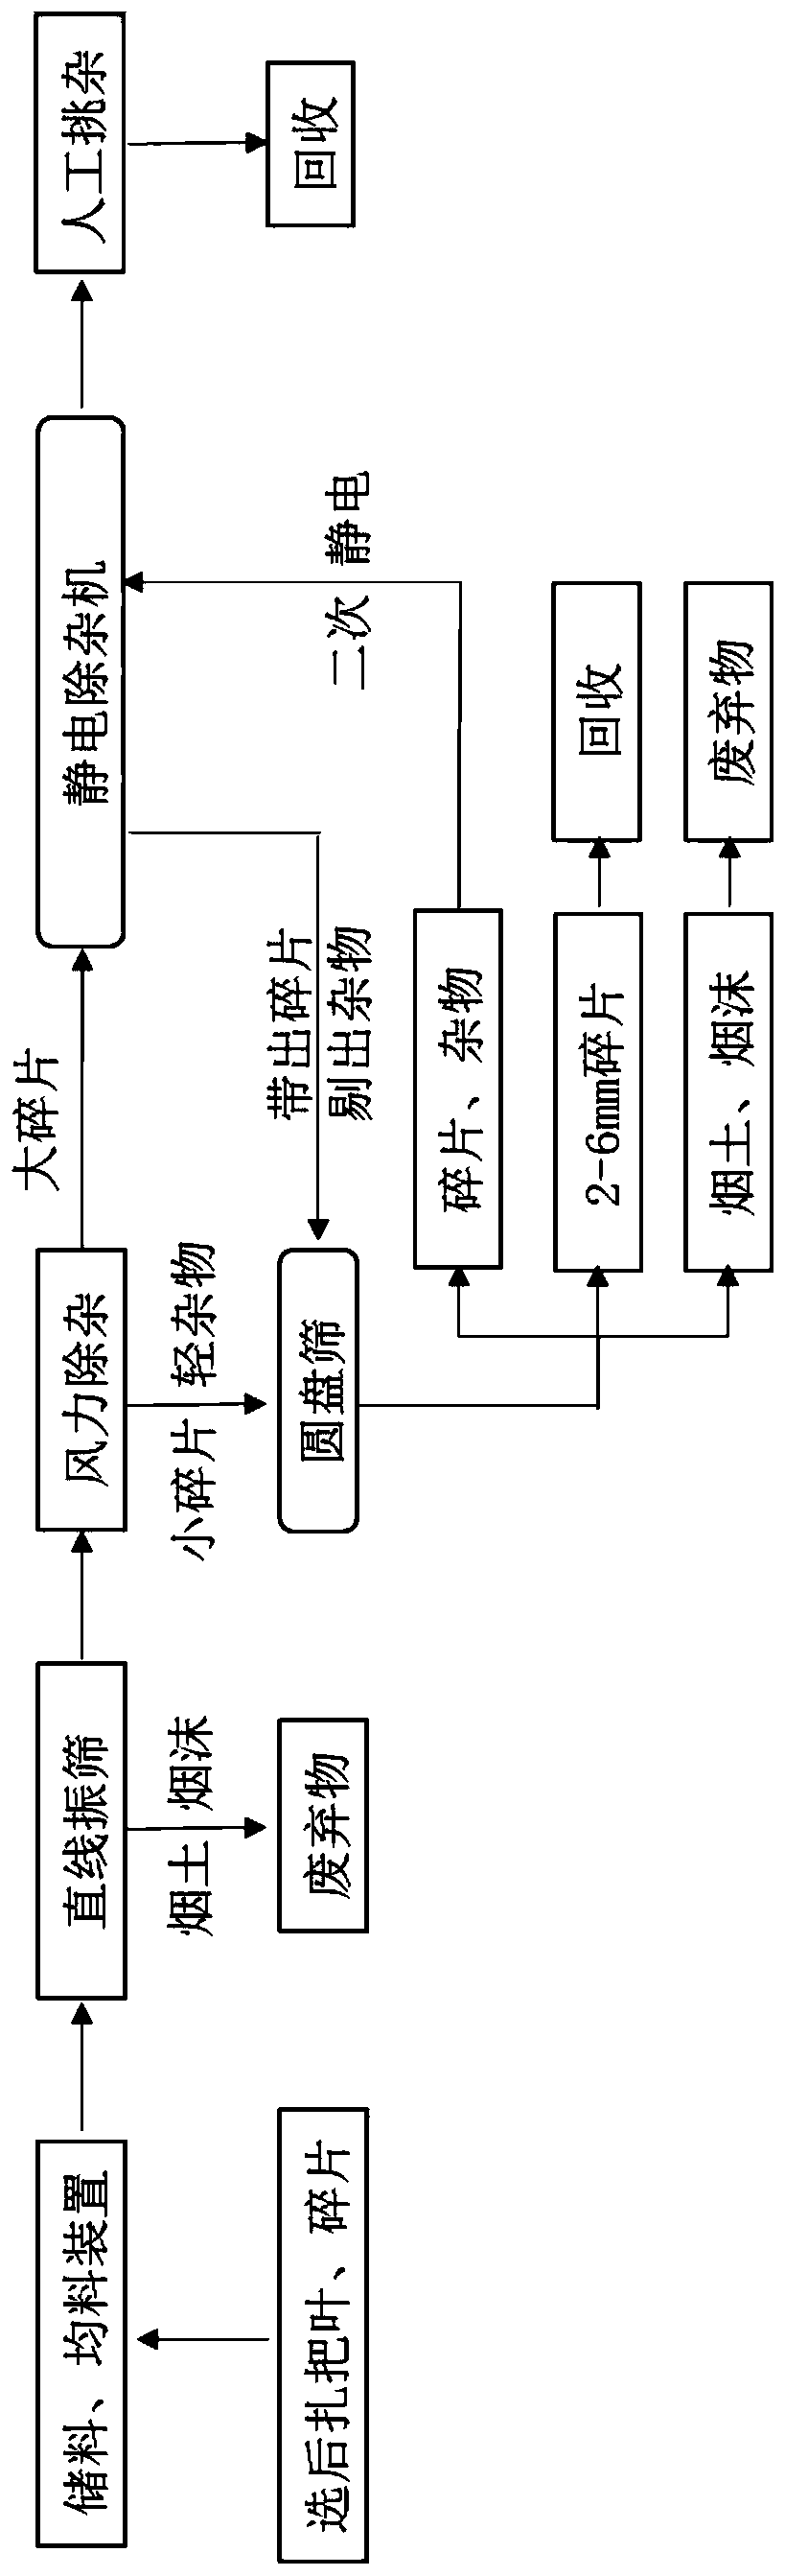 Impurity removing method suitable for tobacco fragments